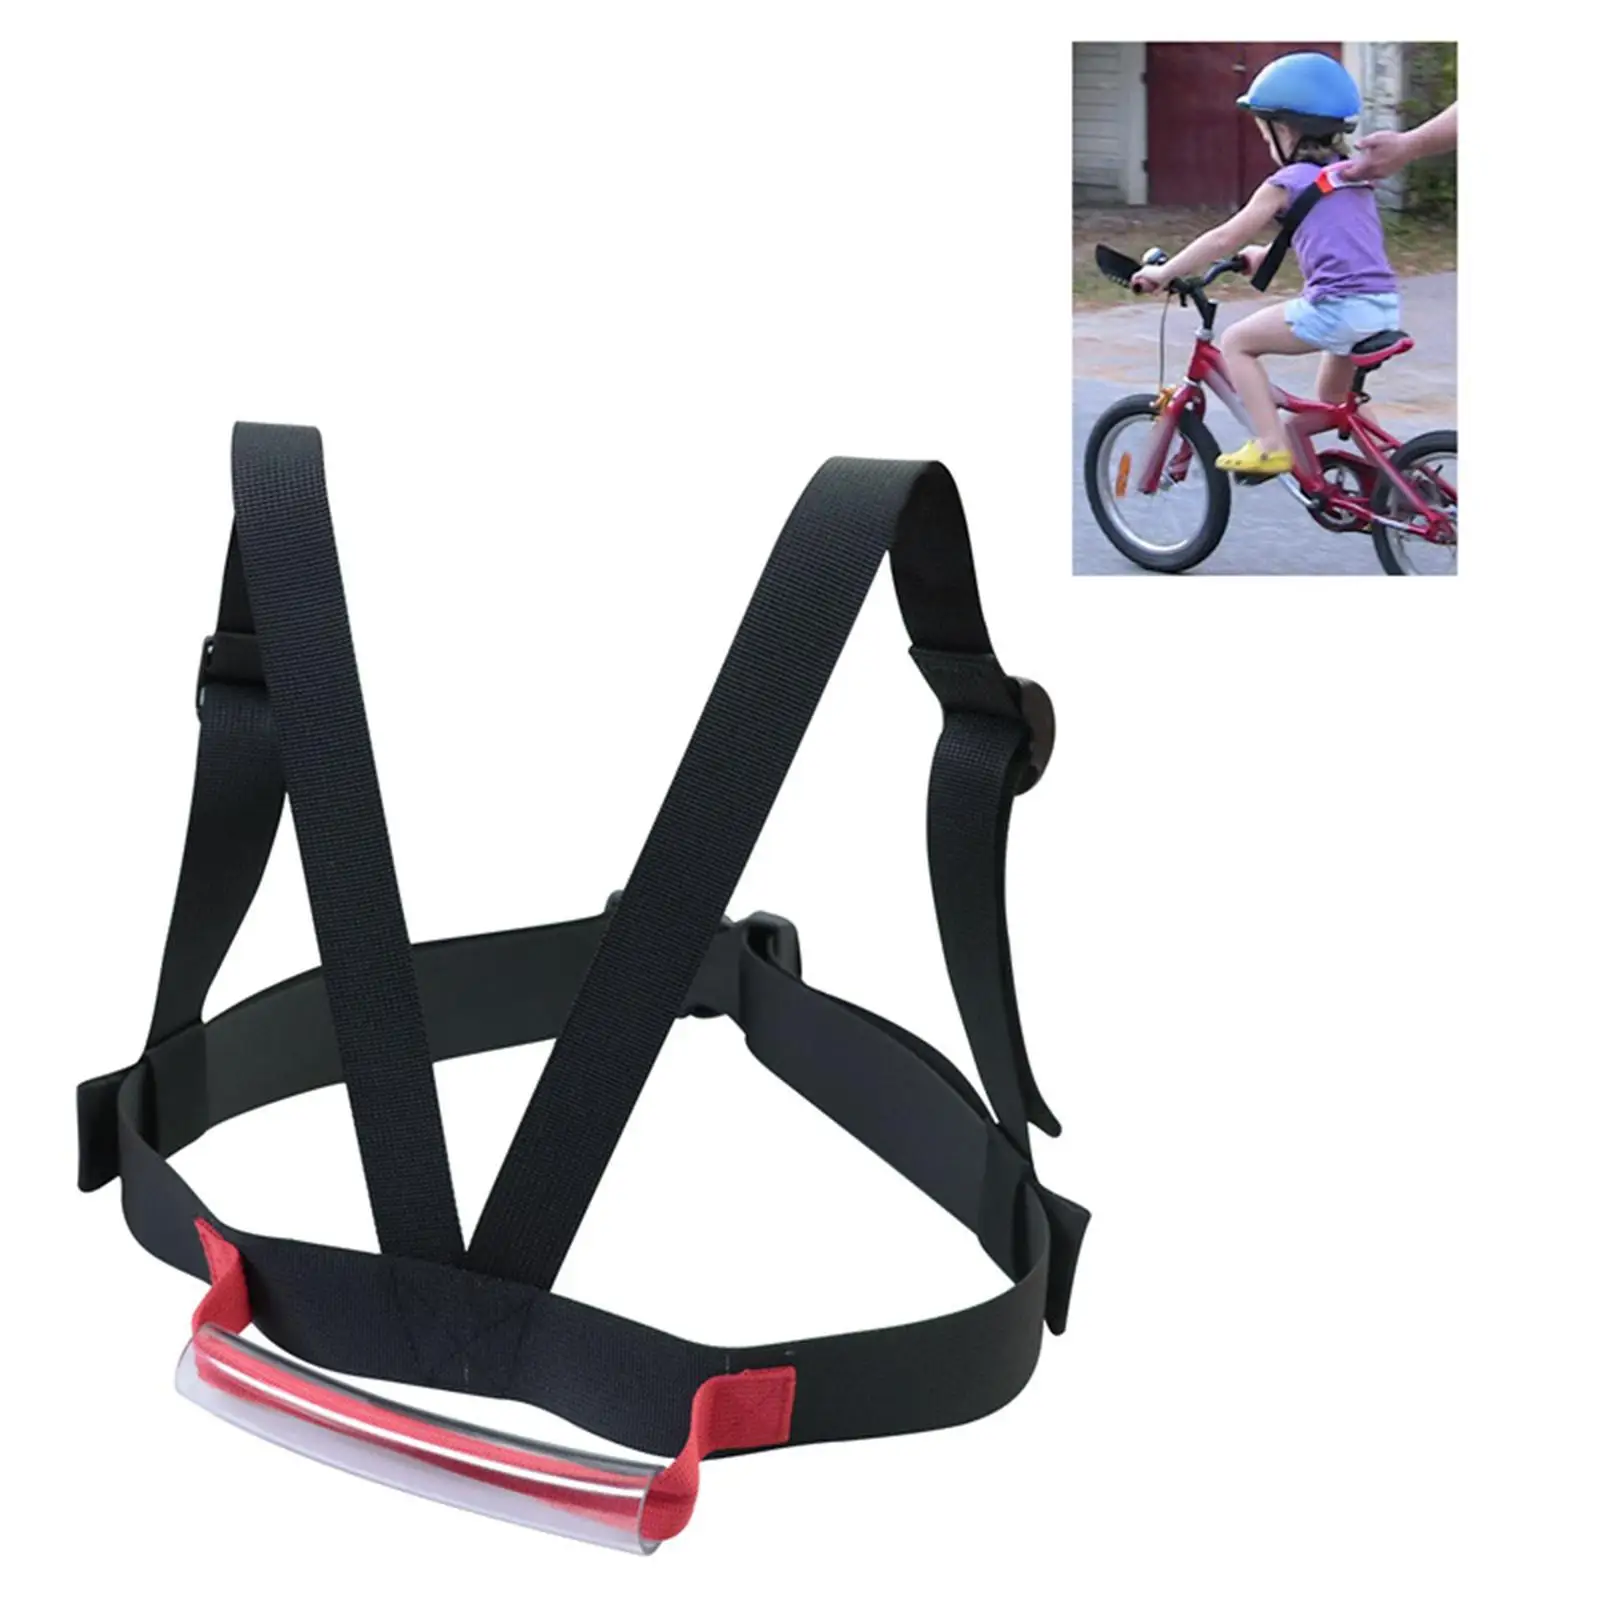 Kids Ski Training Harness, Safety Comfortable Ski and Snowboard Harness Trainer, Kids Ski Trainer-for Boys and Girls